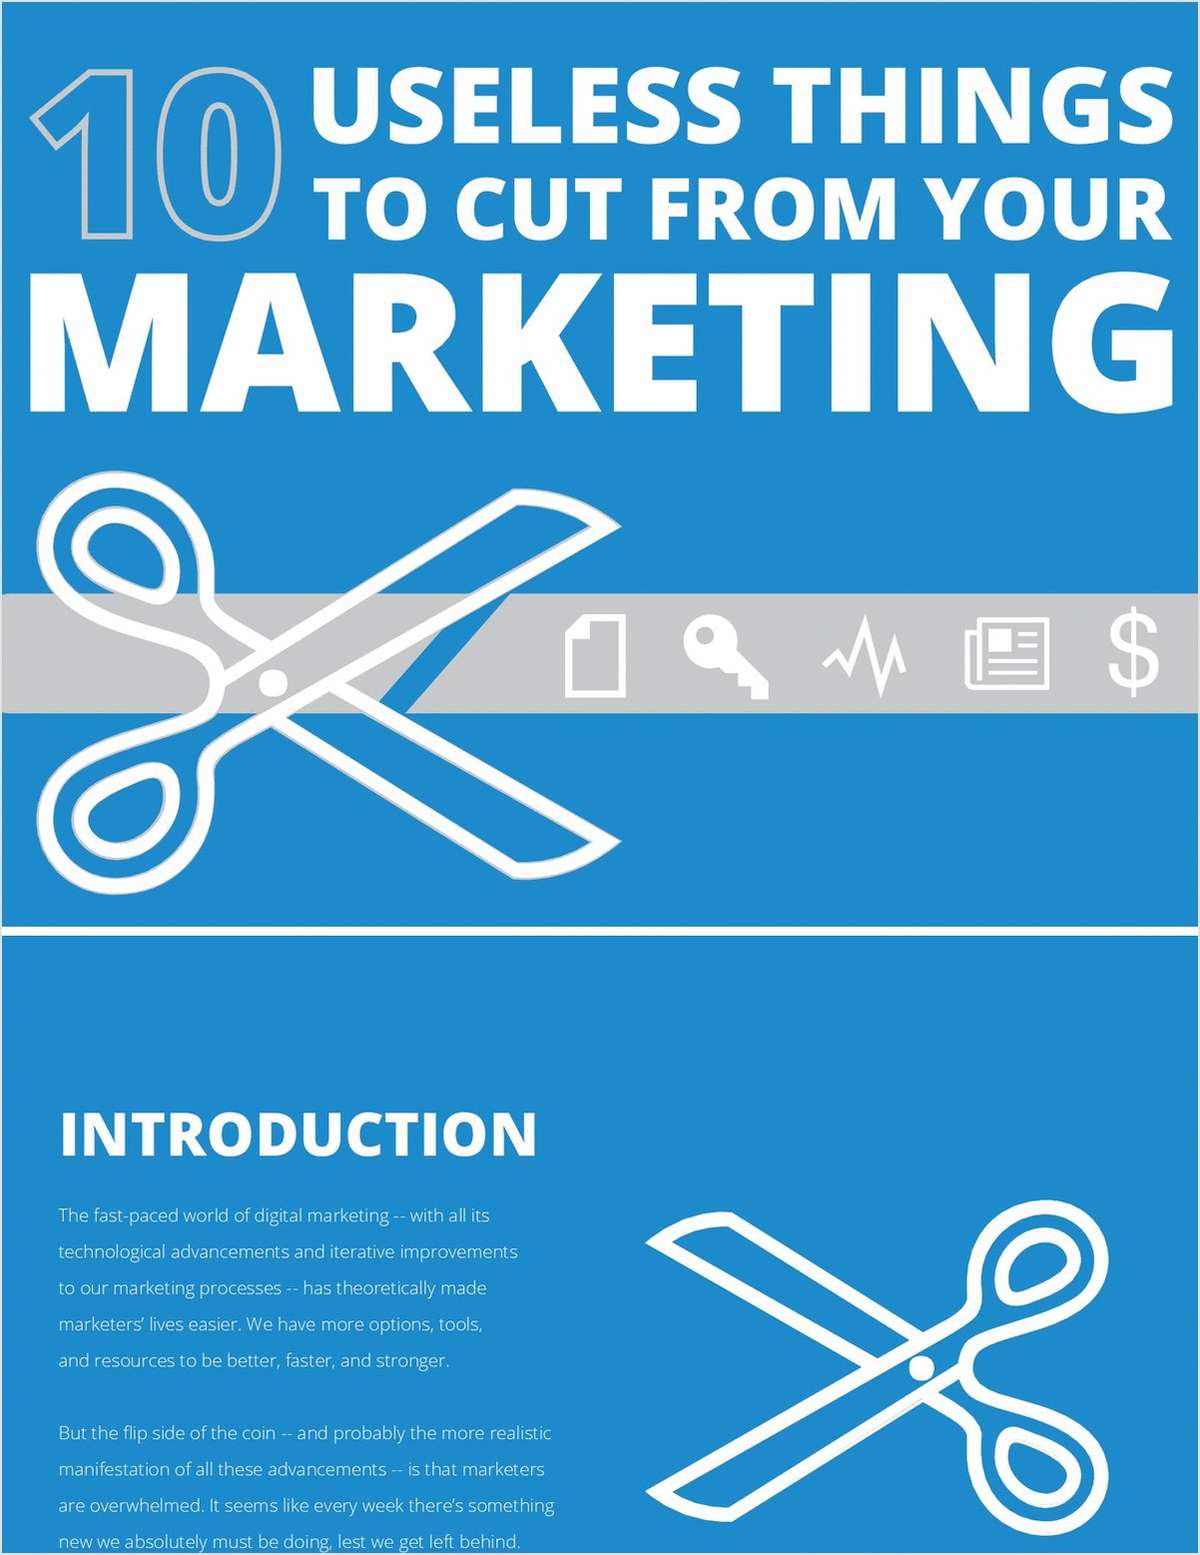 10 Useless Things To Cut From Your Digital Marketing Budget Right Now